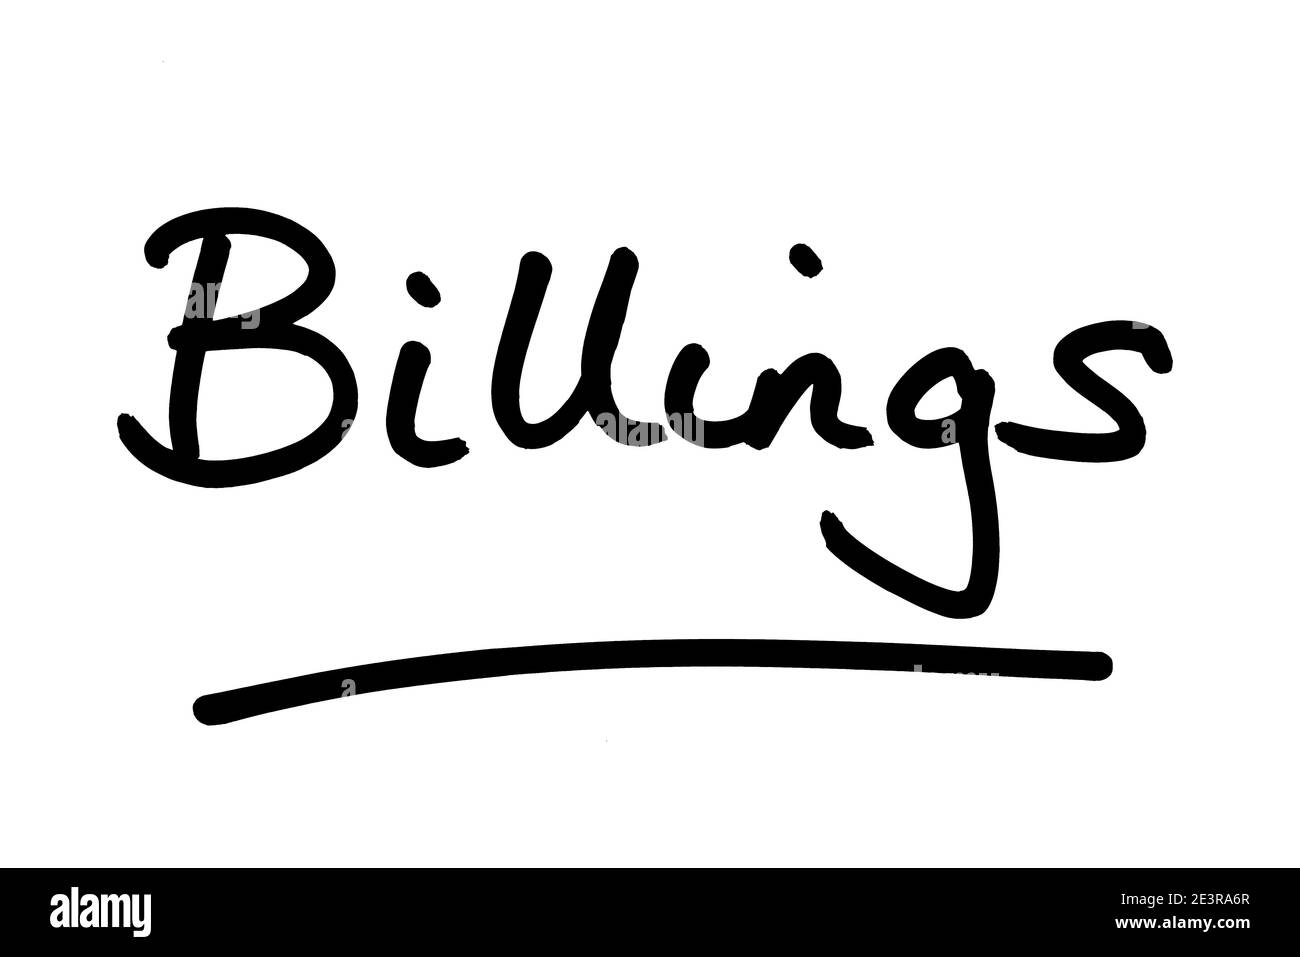 Billings - a city in the state of Montana in the United States of America. Stock Photo